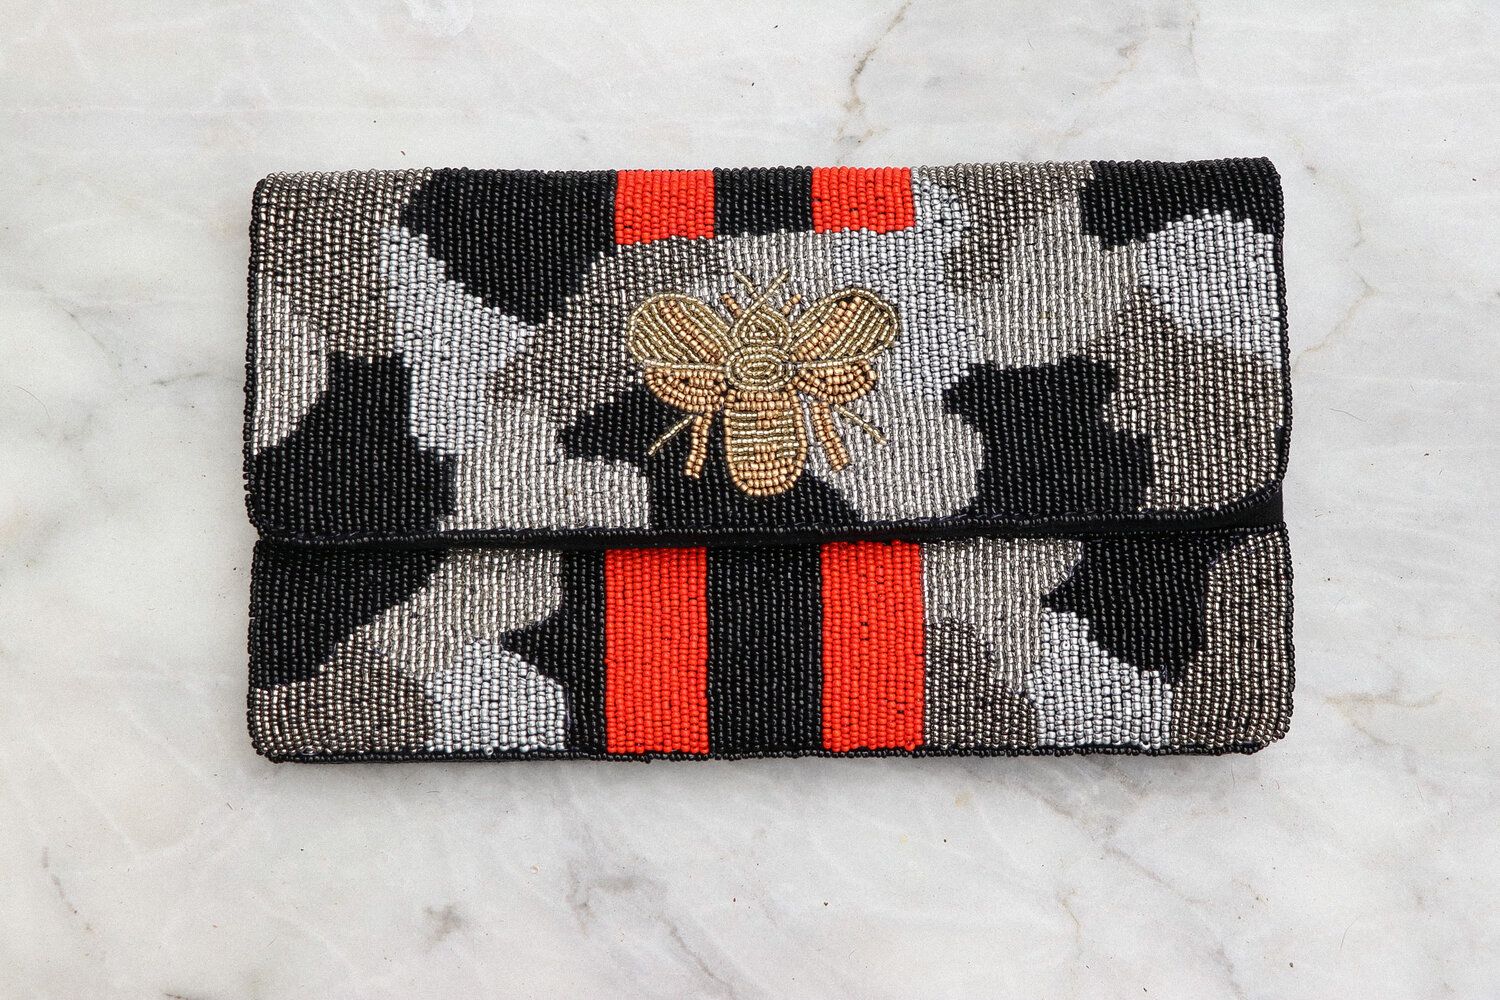 Camo Print Beaded Clutch with Bee | The Gilded Hive